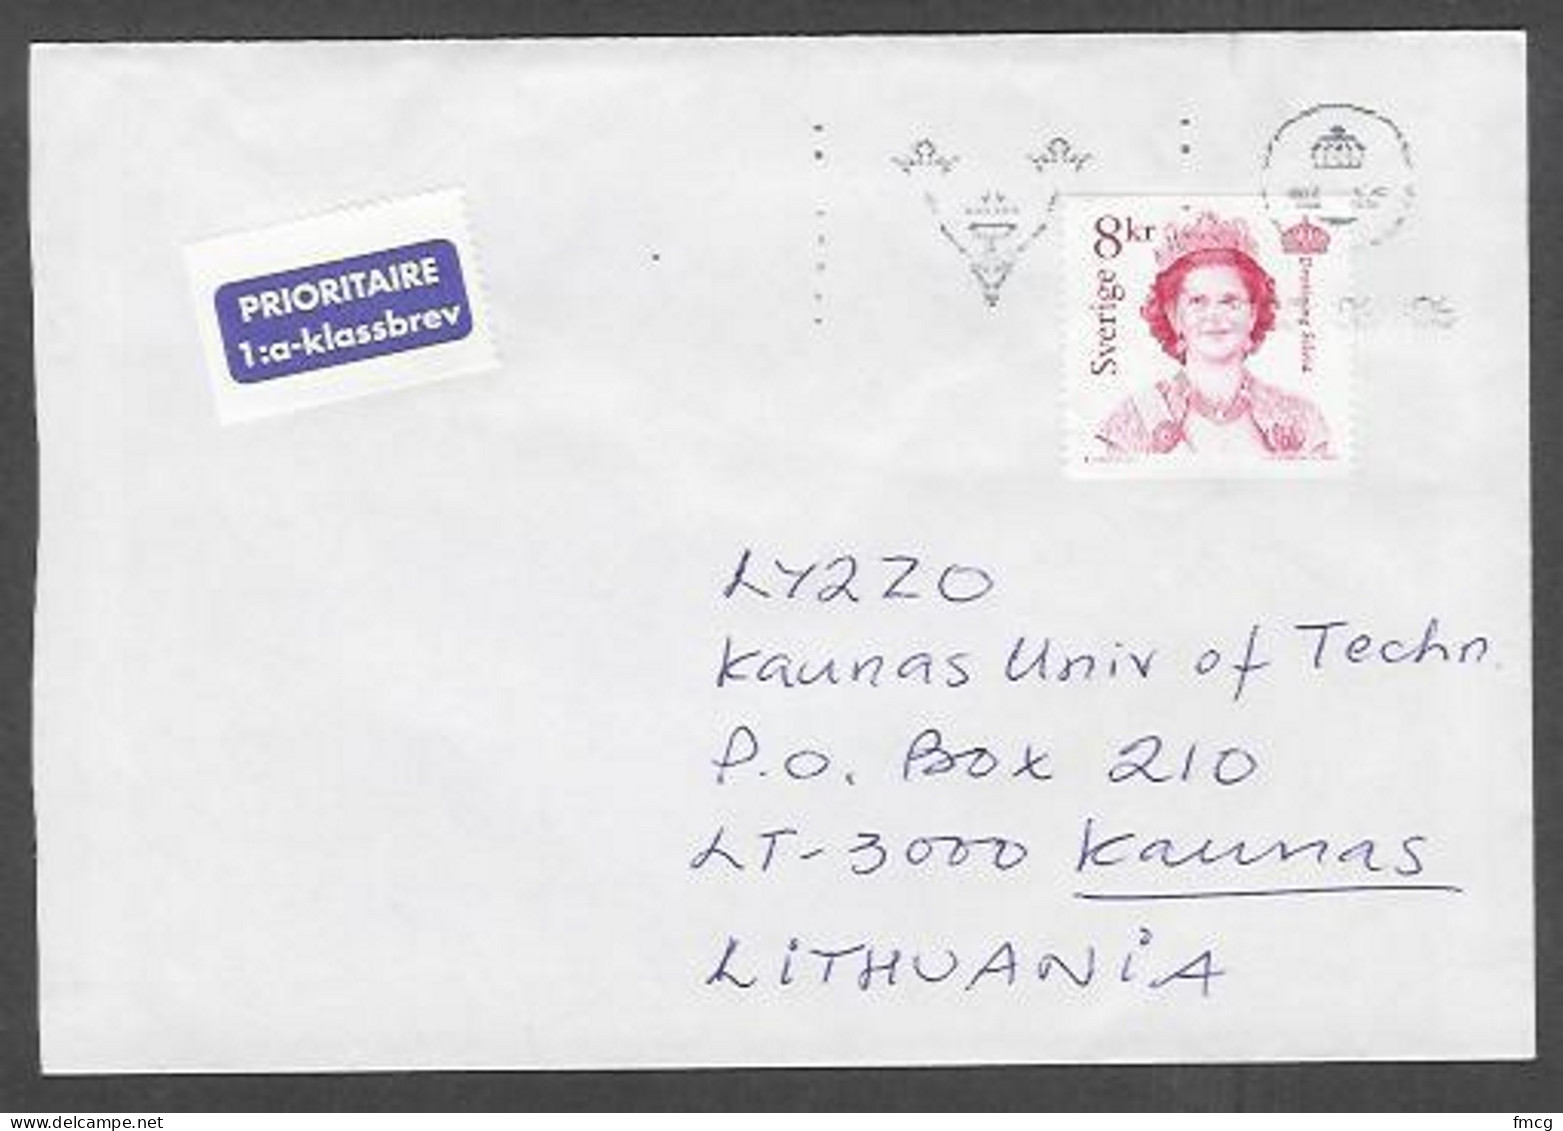 8 Kr Queen Sivia On Cover To Kaunas Lithuania - Lettres & Documents